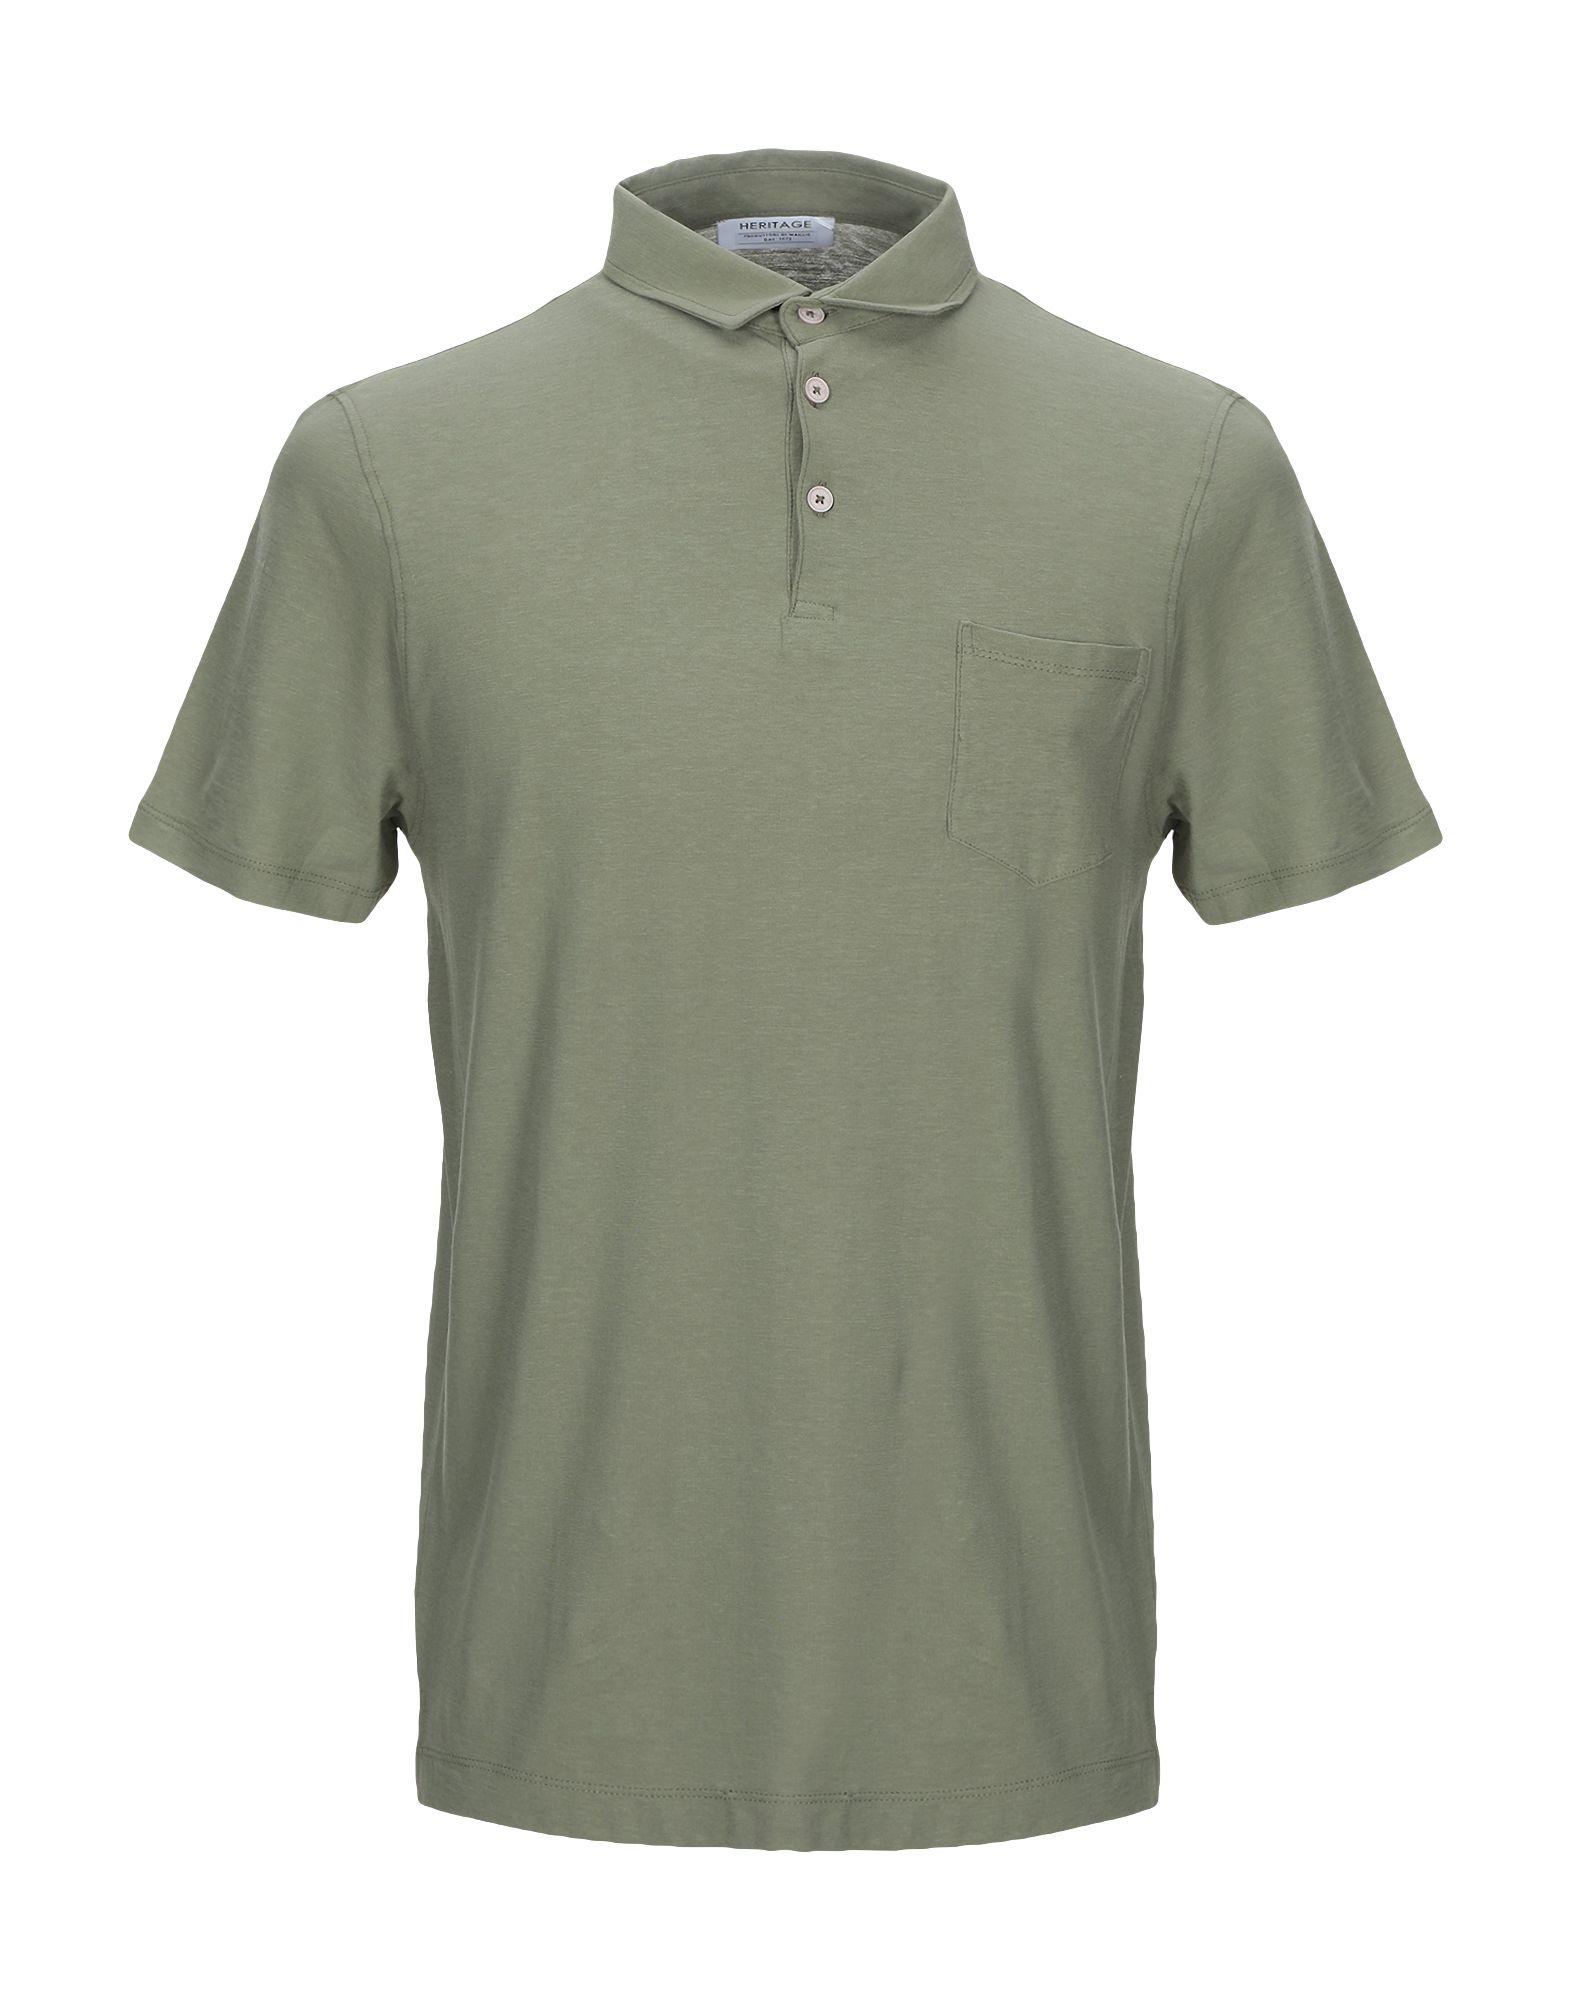 Heritage Cotton Polo Shirt in Military Green (Green) for Men - Lyst